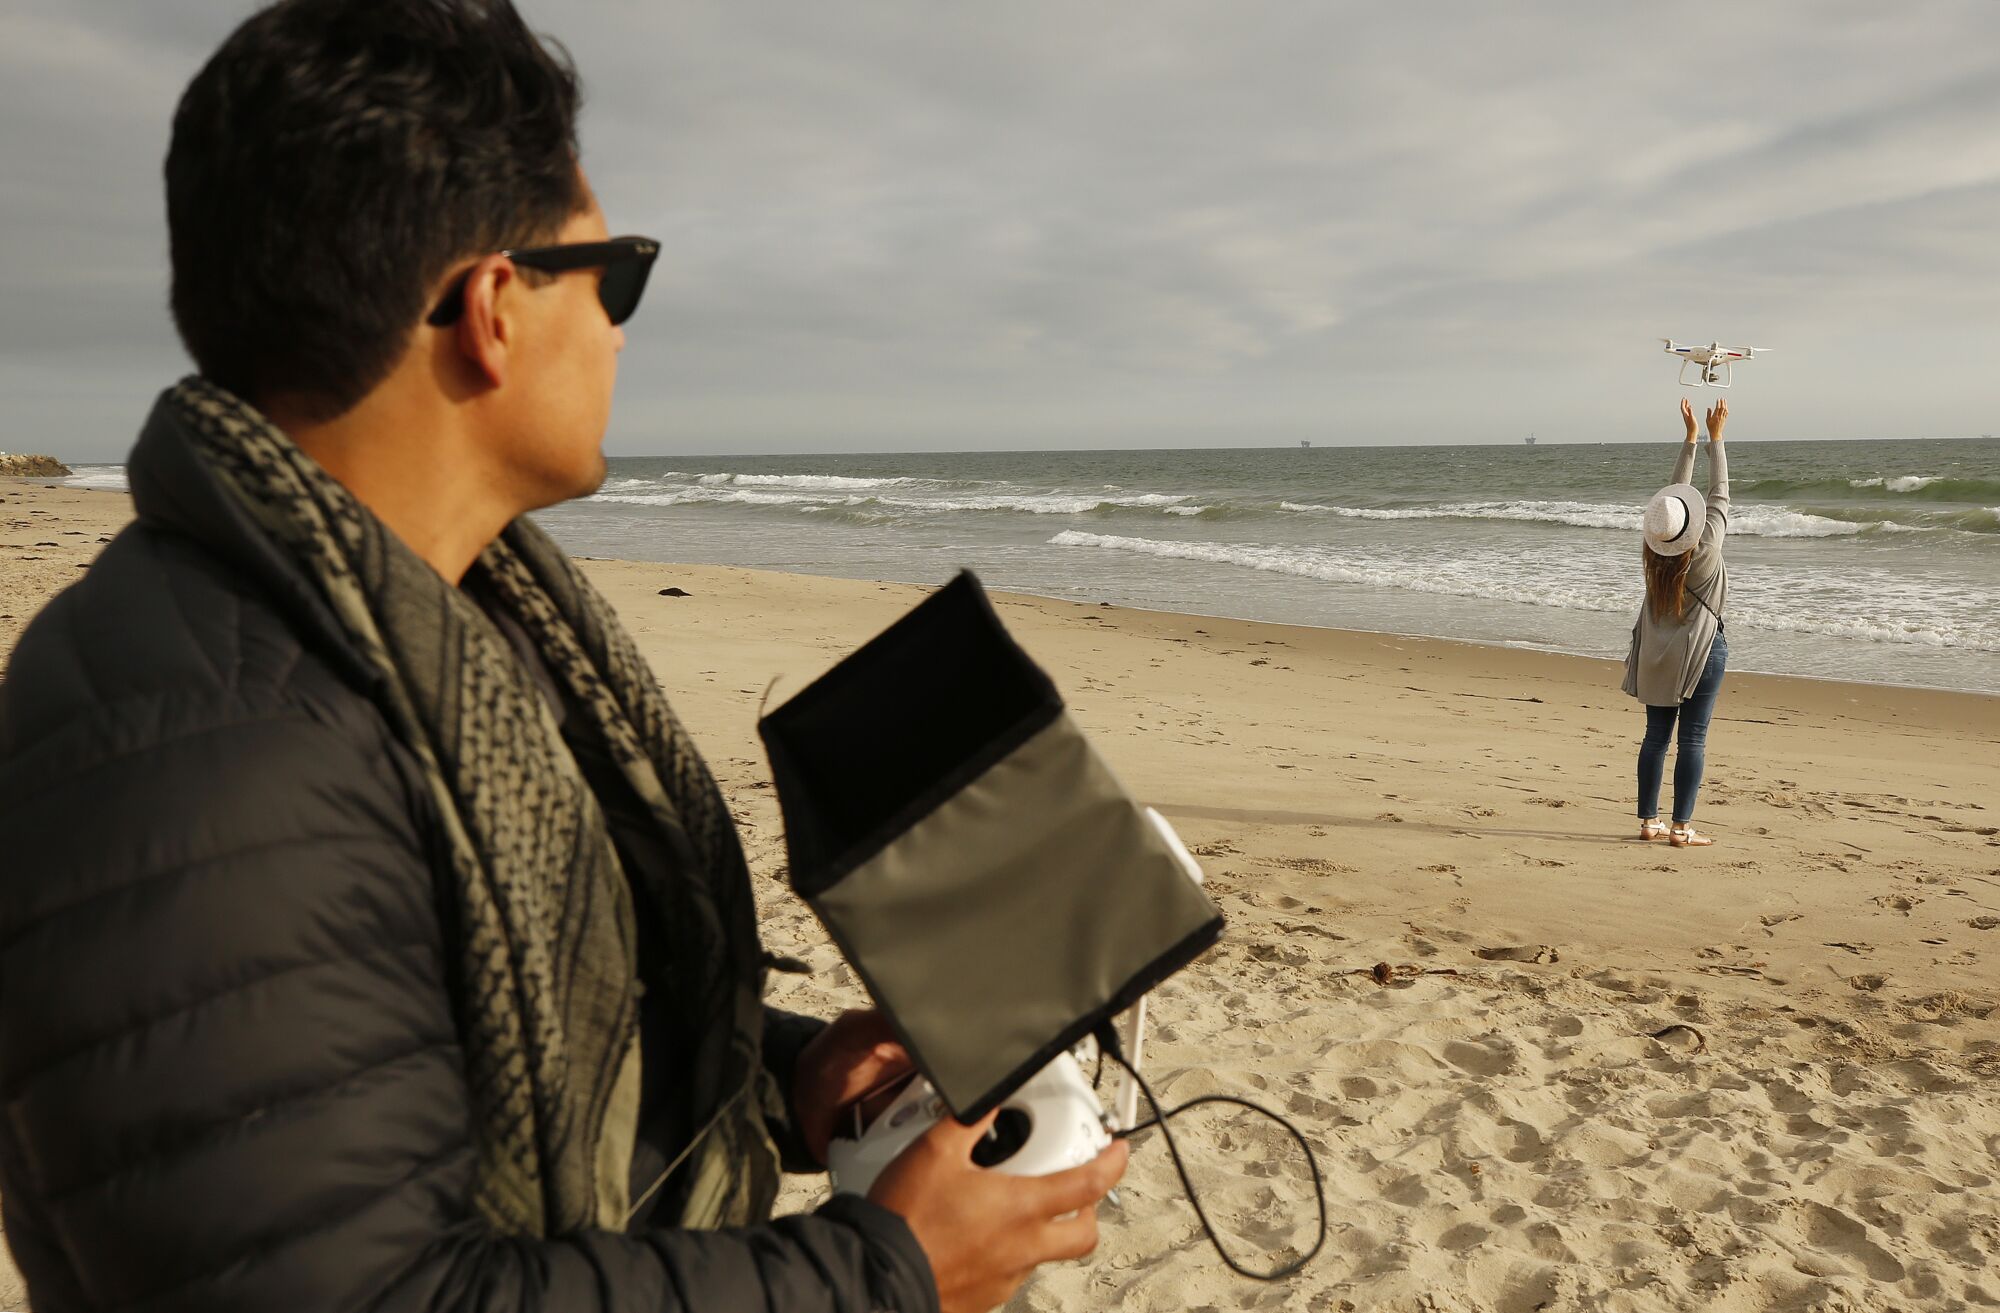 Drone photographer Carlos Gauna, with the assistance from his wife, Andressa, launches a drone